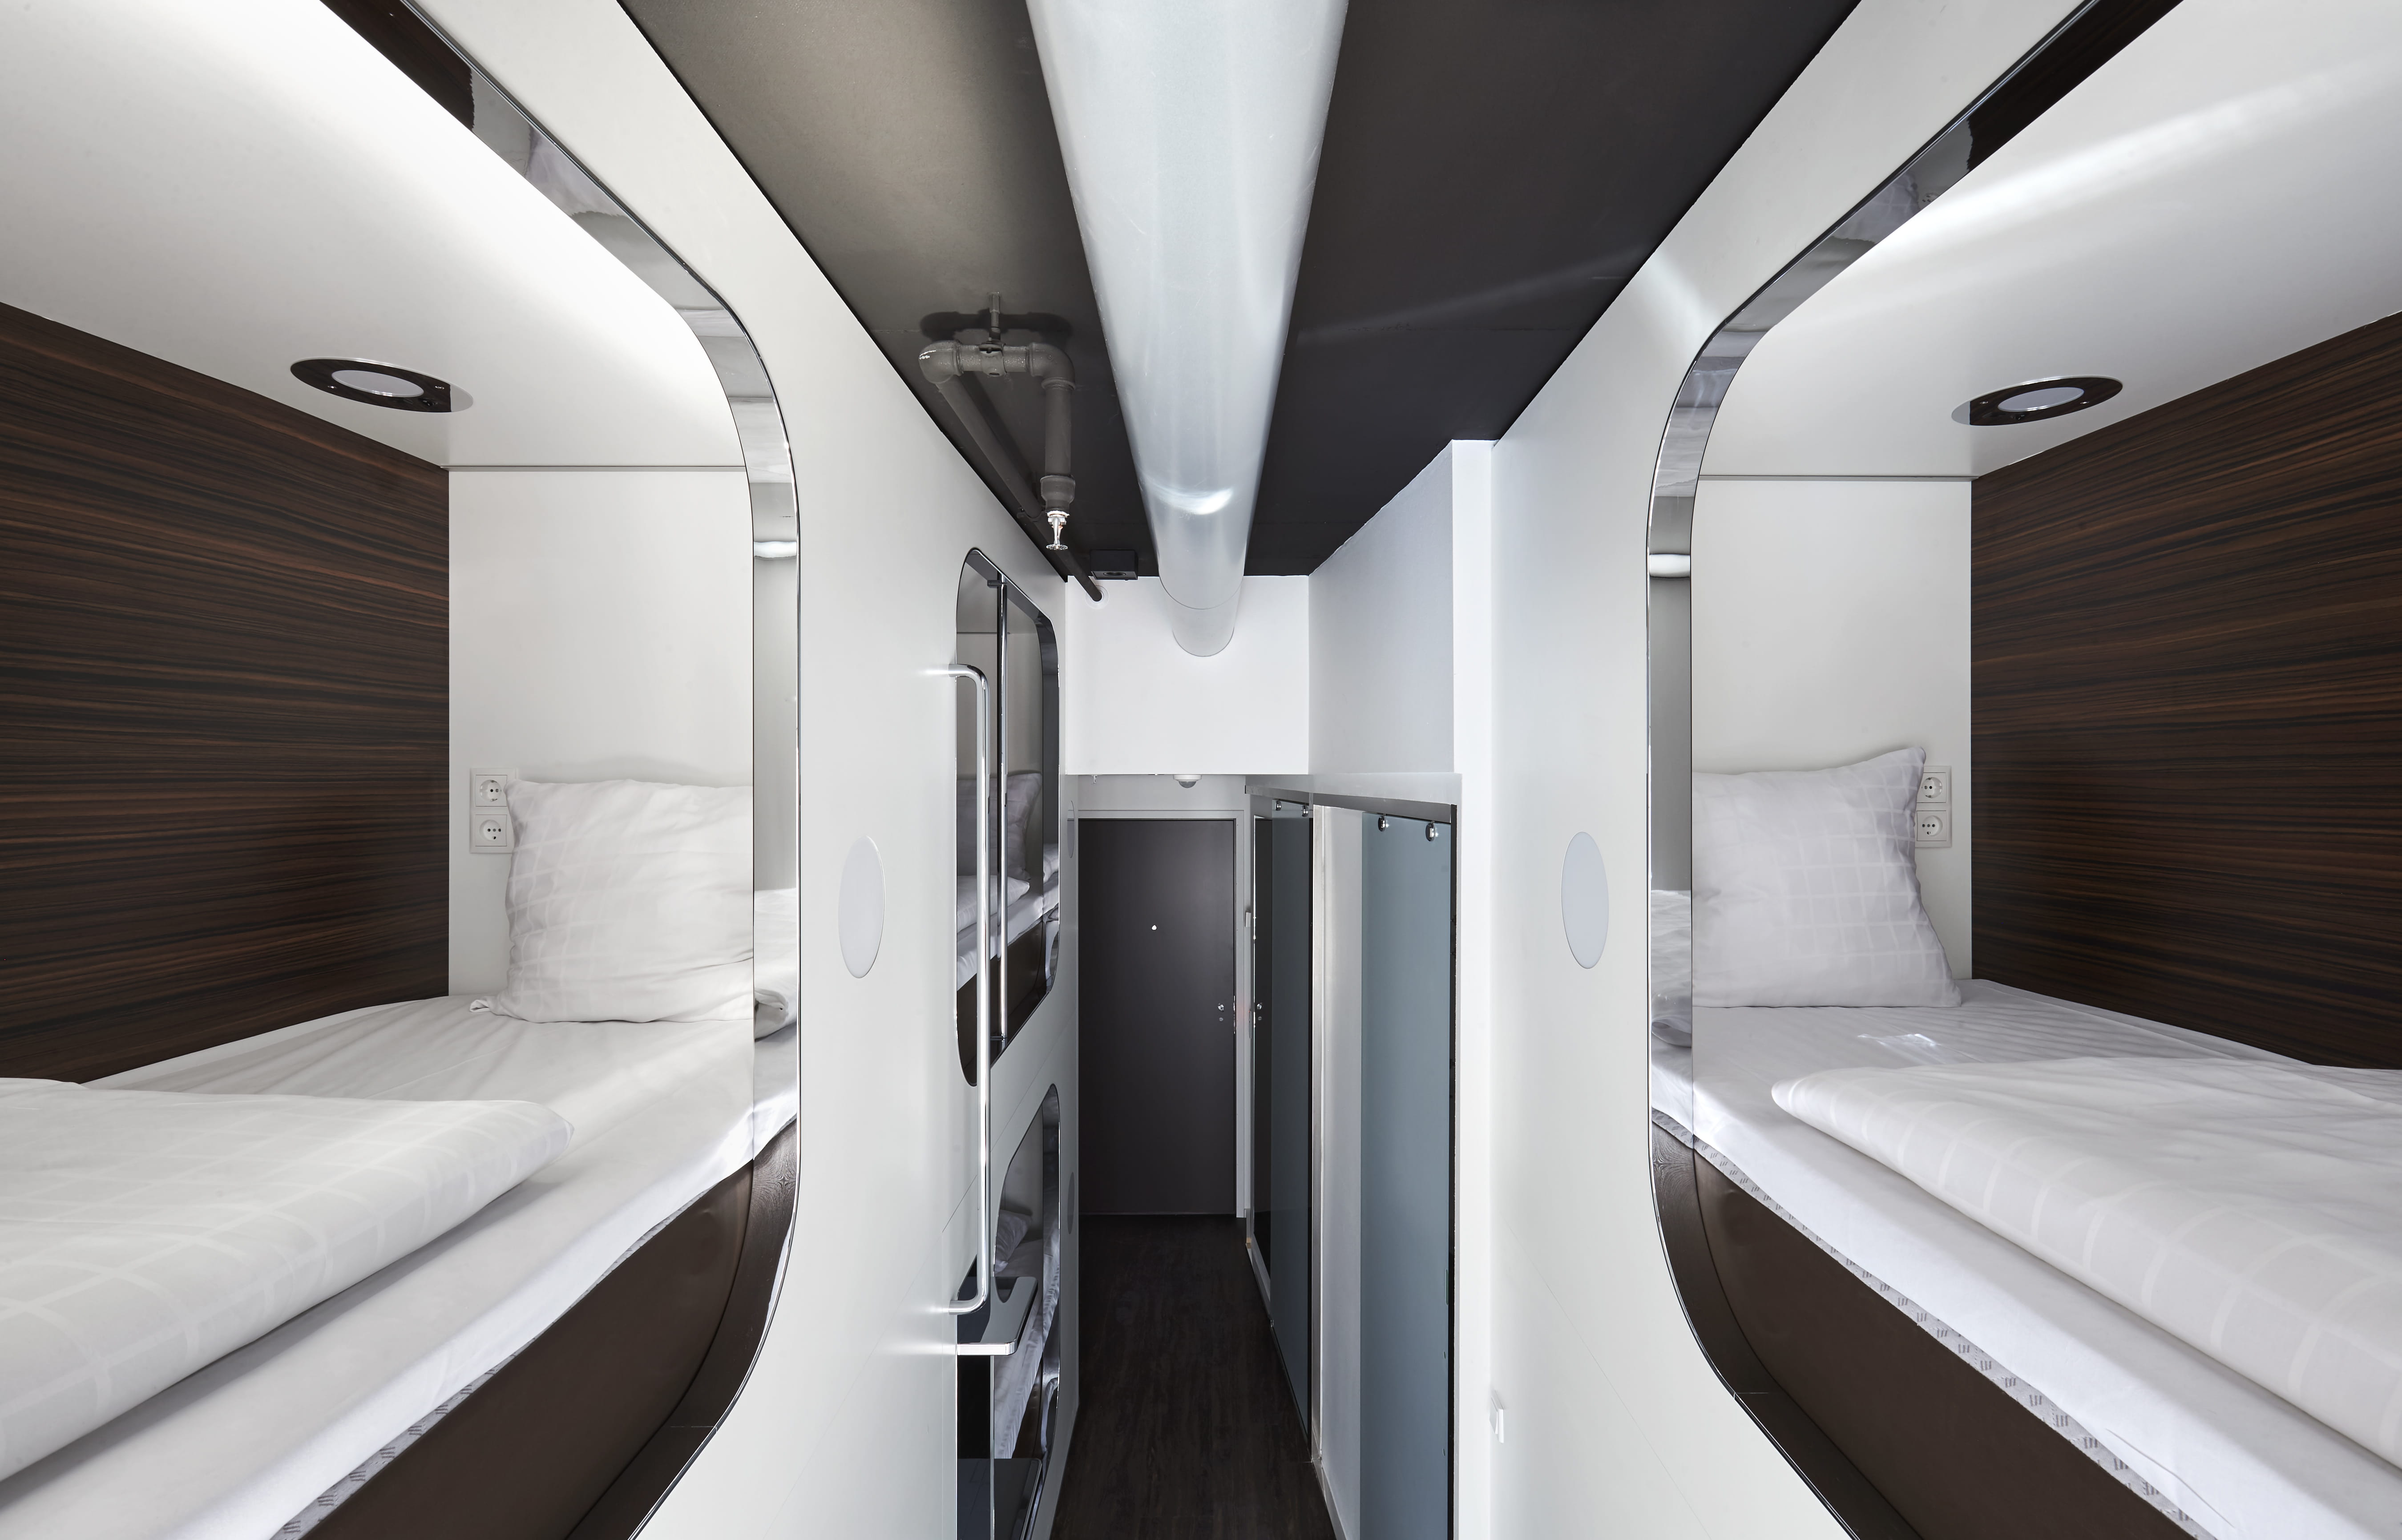 The 6-bed room have cool cabin divided beds